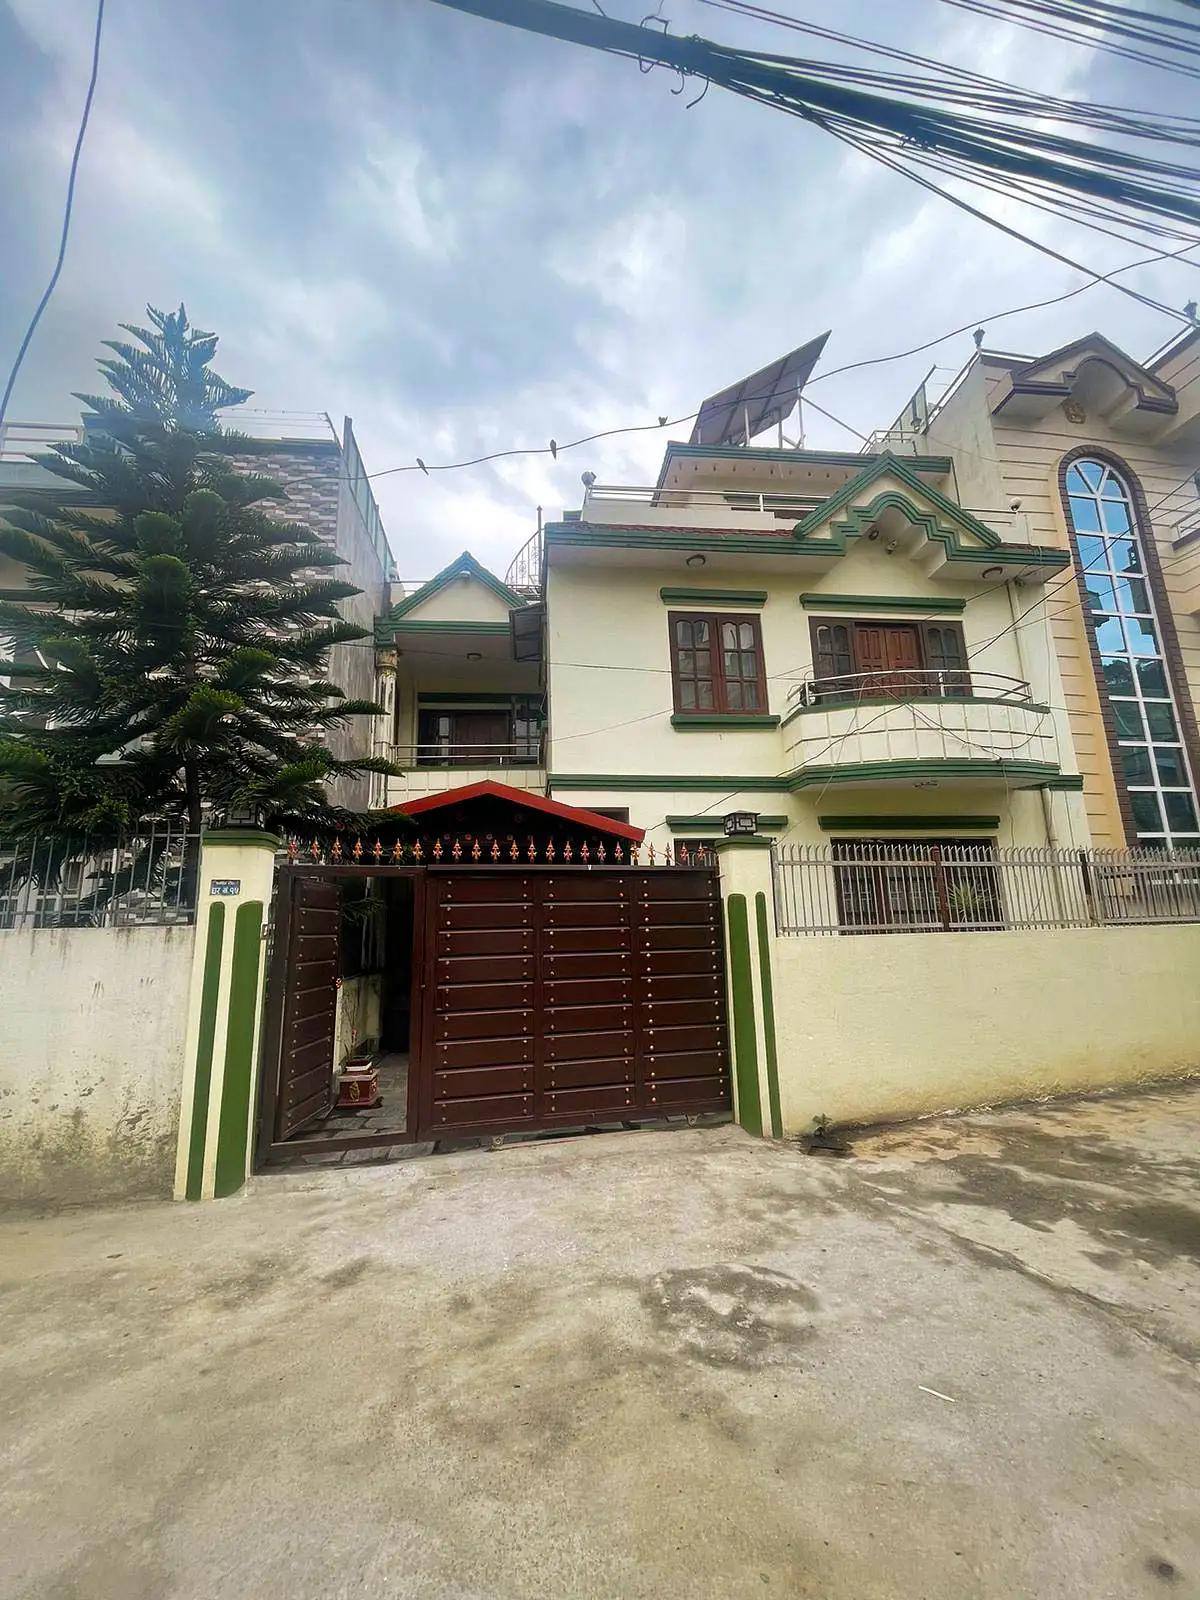 Bungalow house for sale in Balaju height-image-1